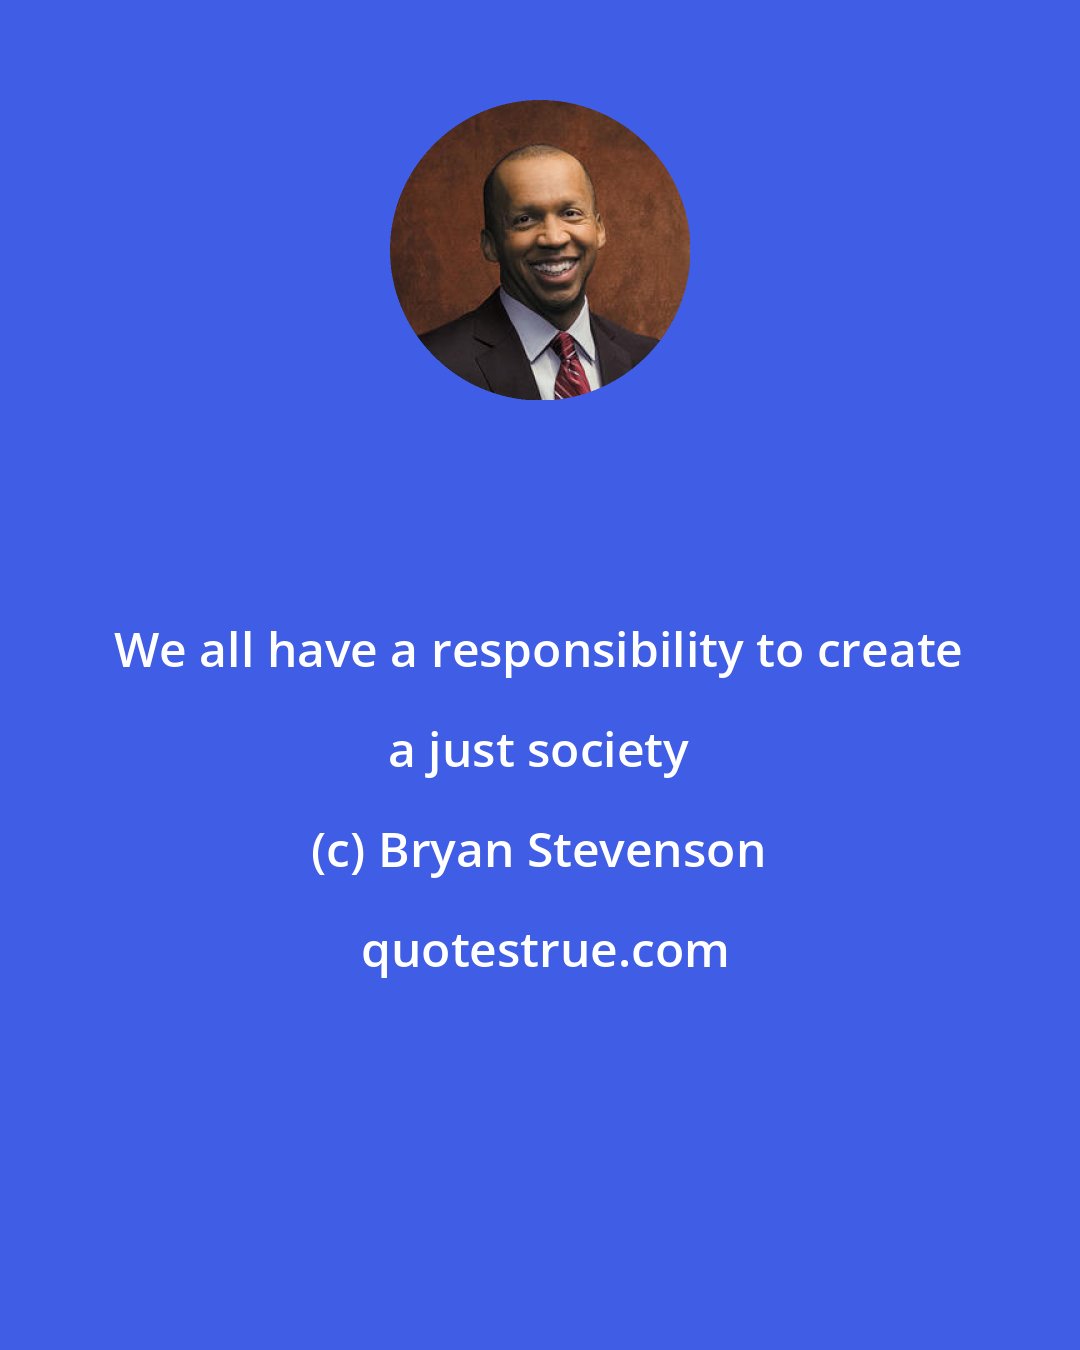 Bryan Stevenson: We all have a responsibility to create a just society